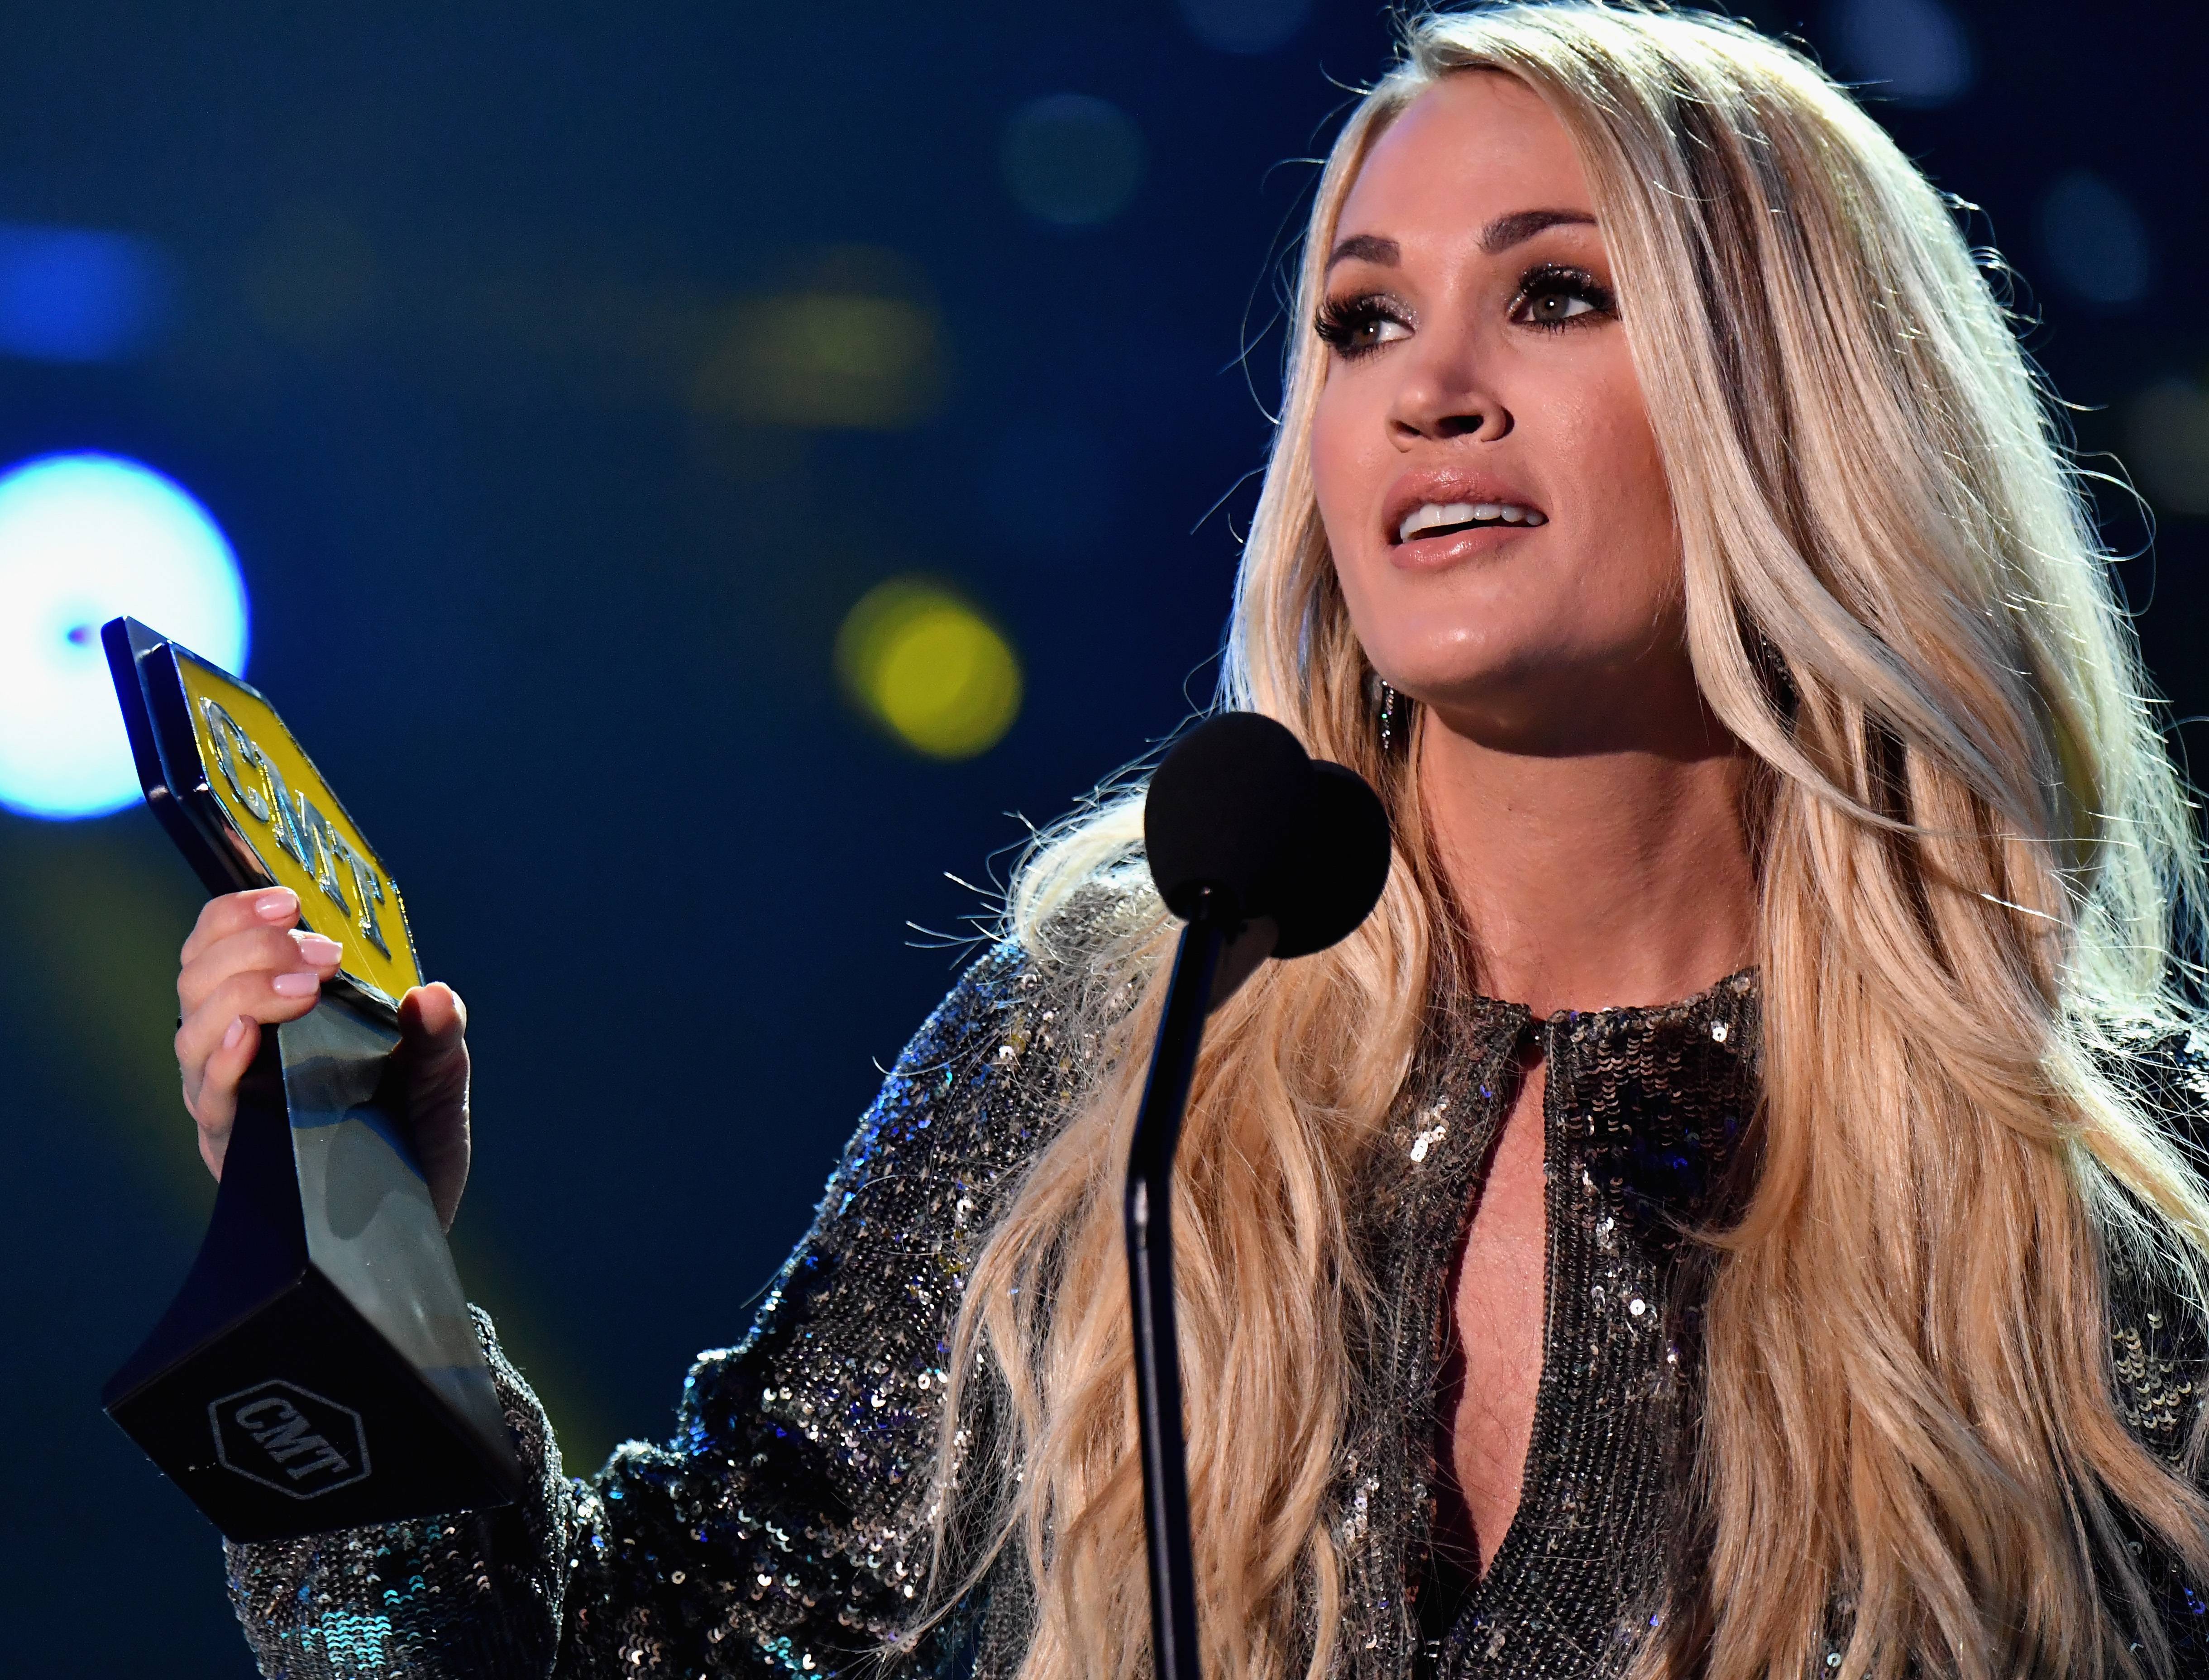 EXCLUSIVE: Carrie Underwood Talks Writing Party Songs for Women, News